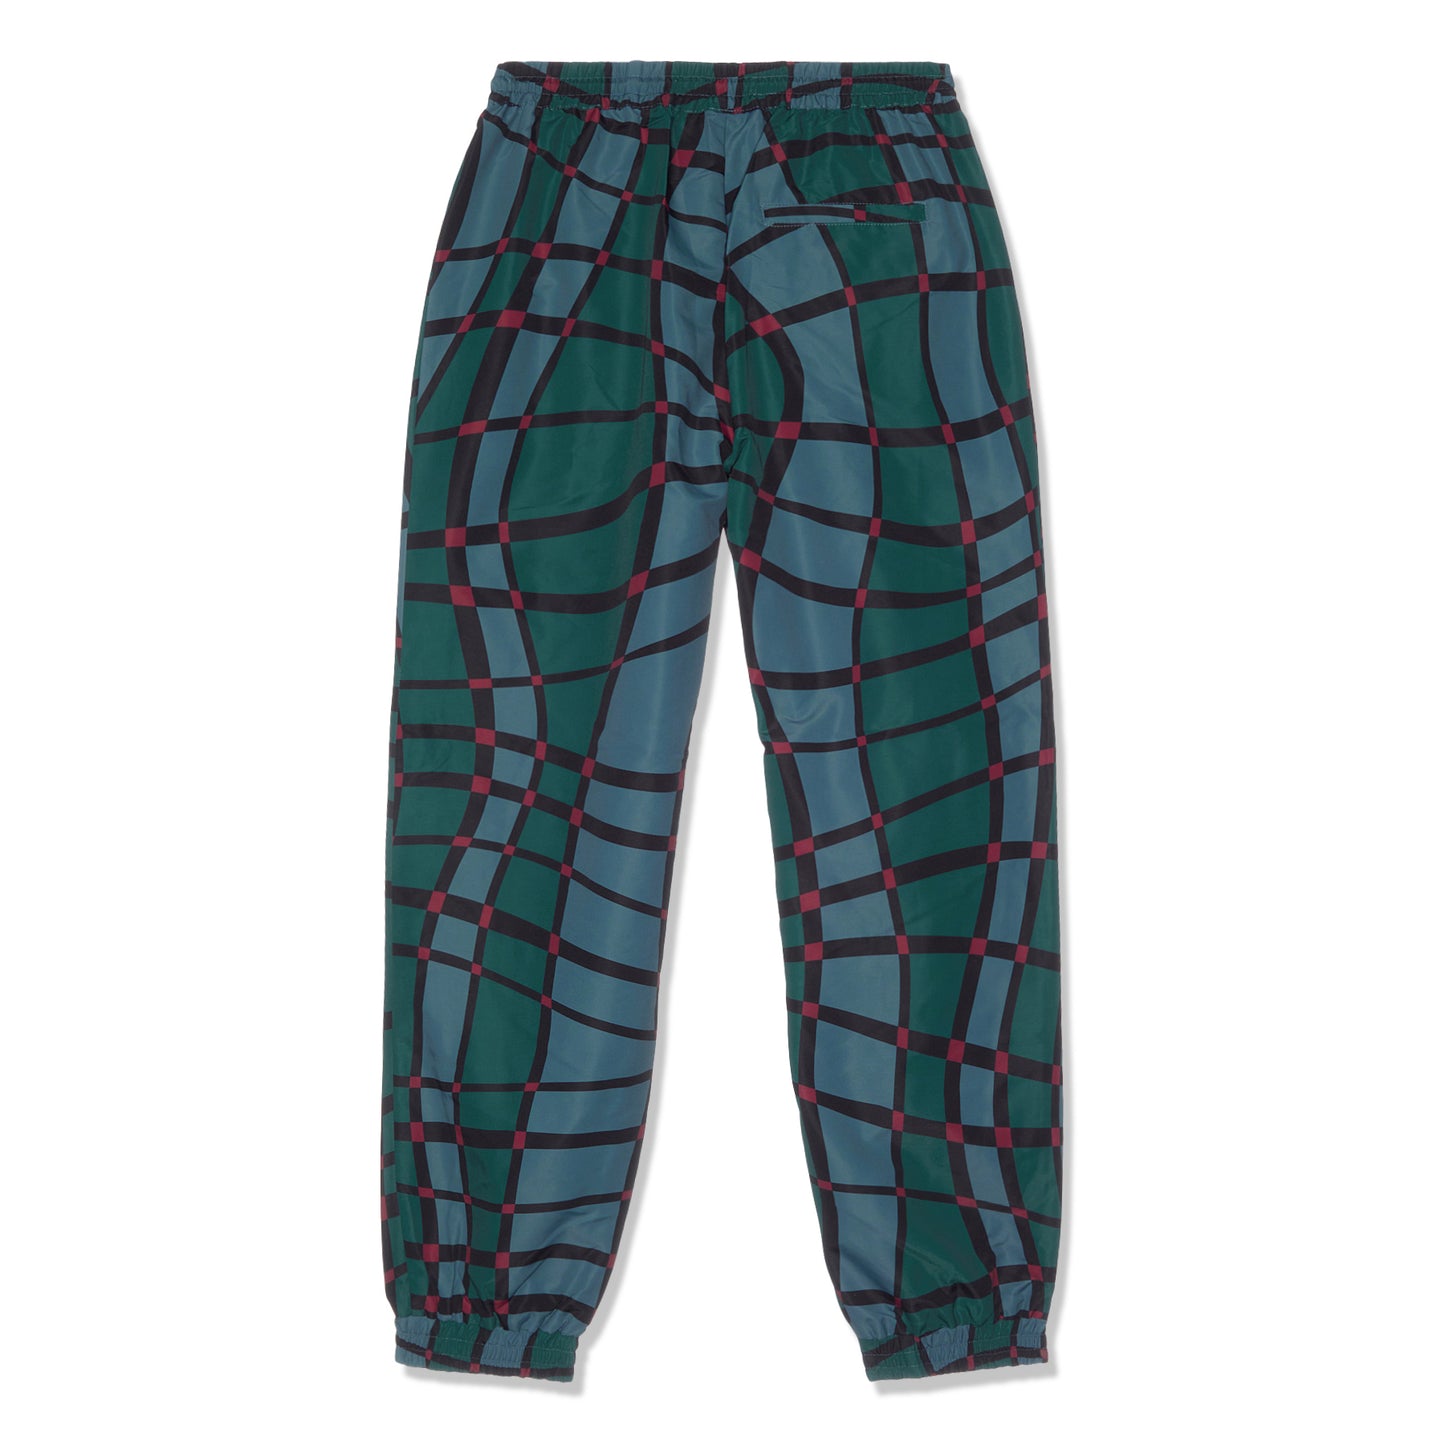 by Parra Squared Waves Pattern Track Pants (Multi Check)